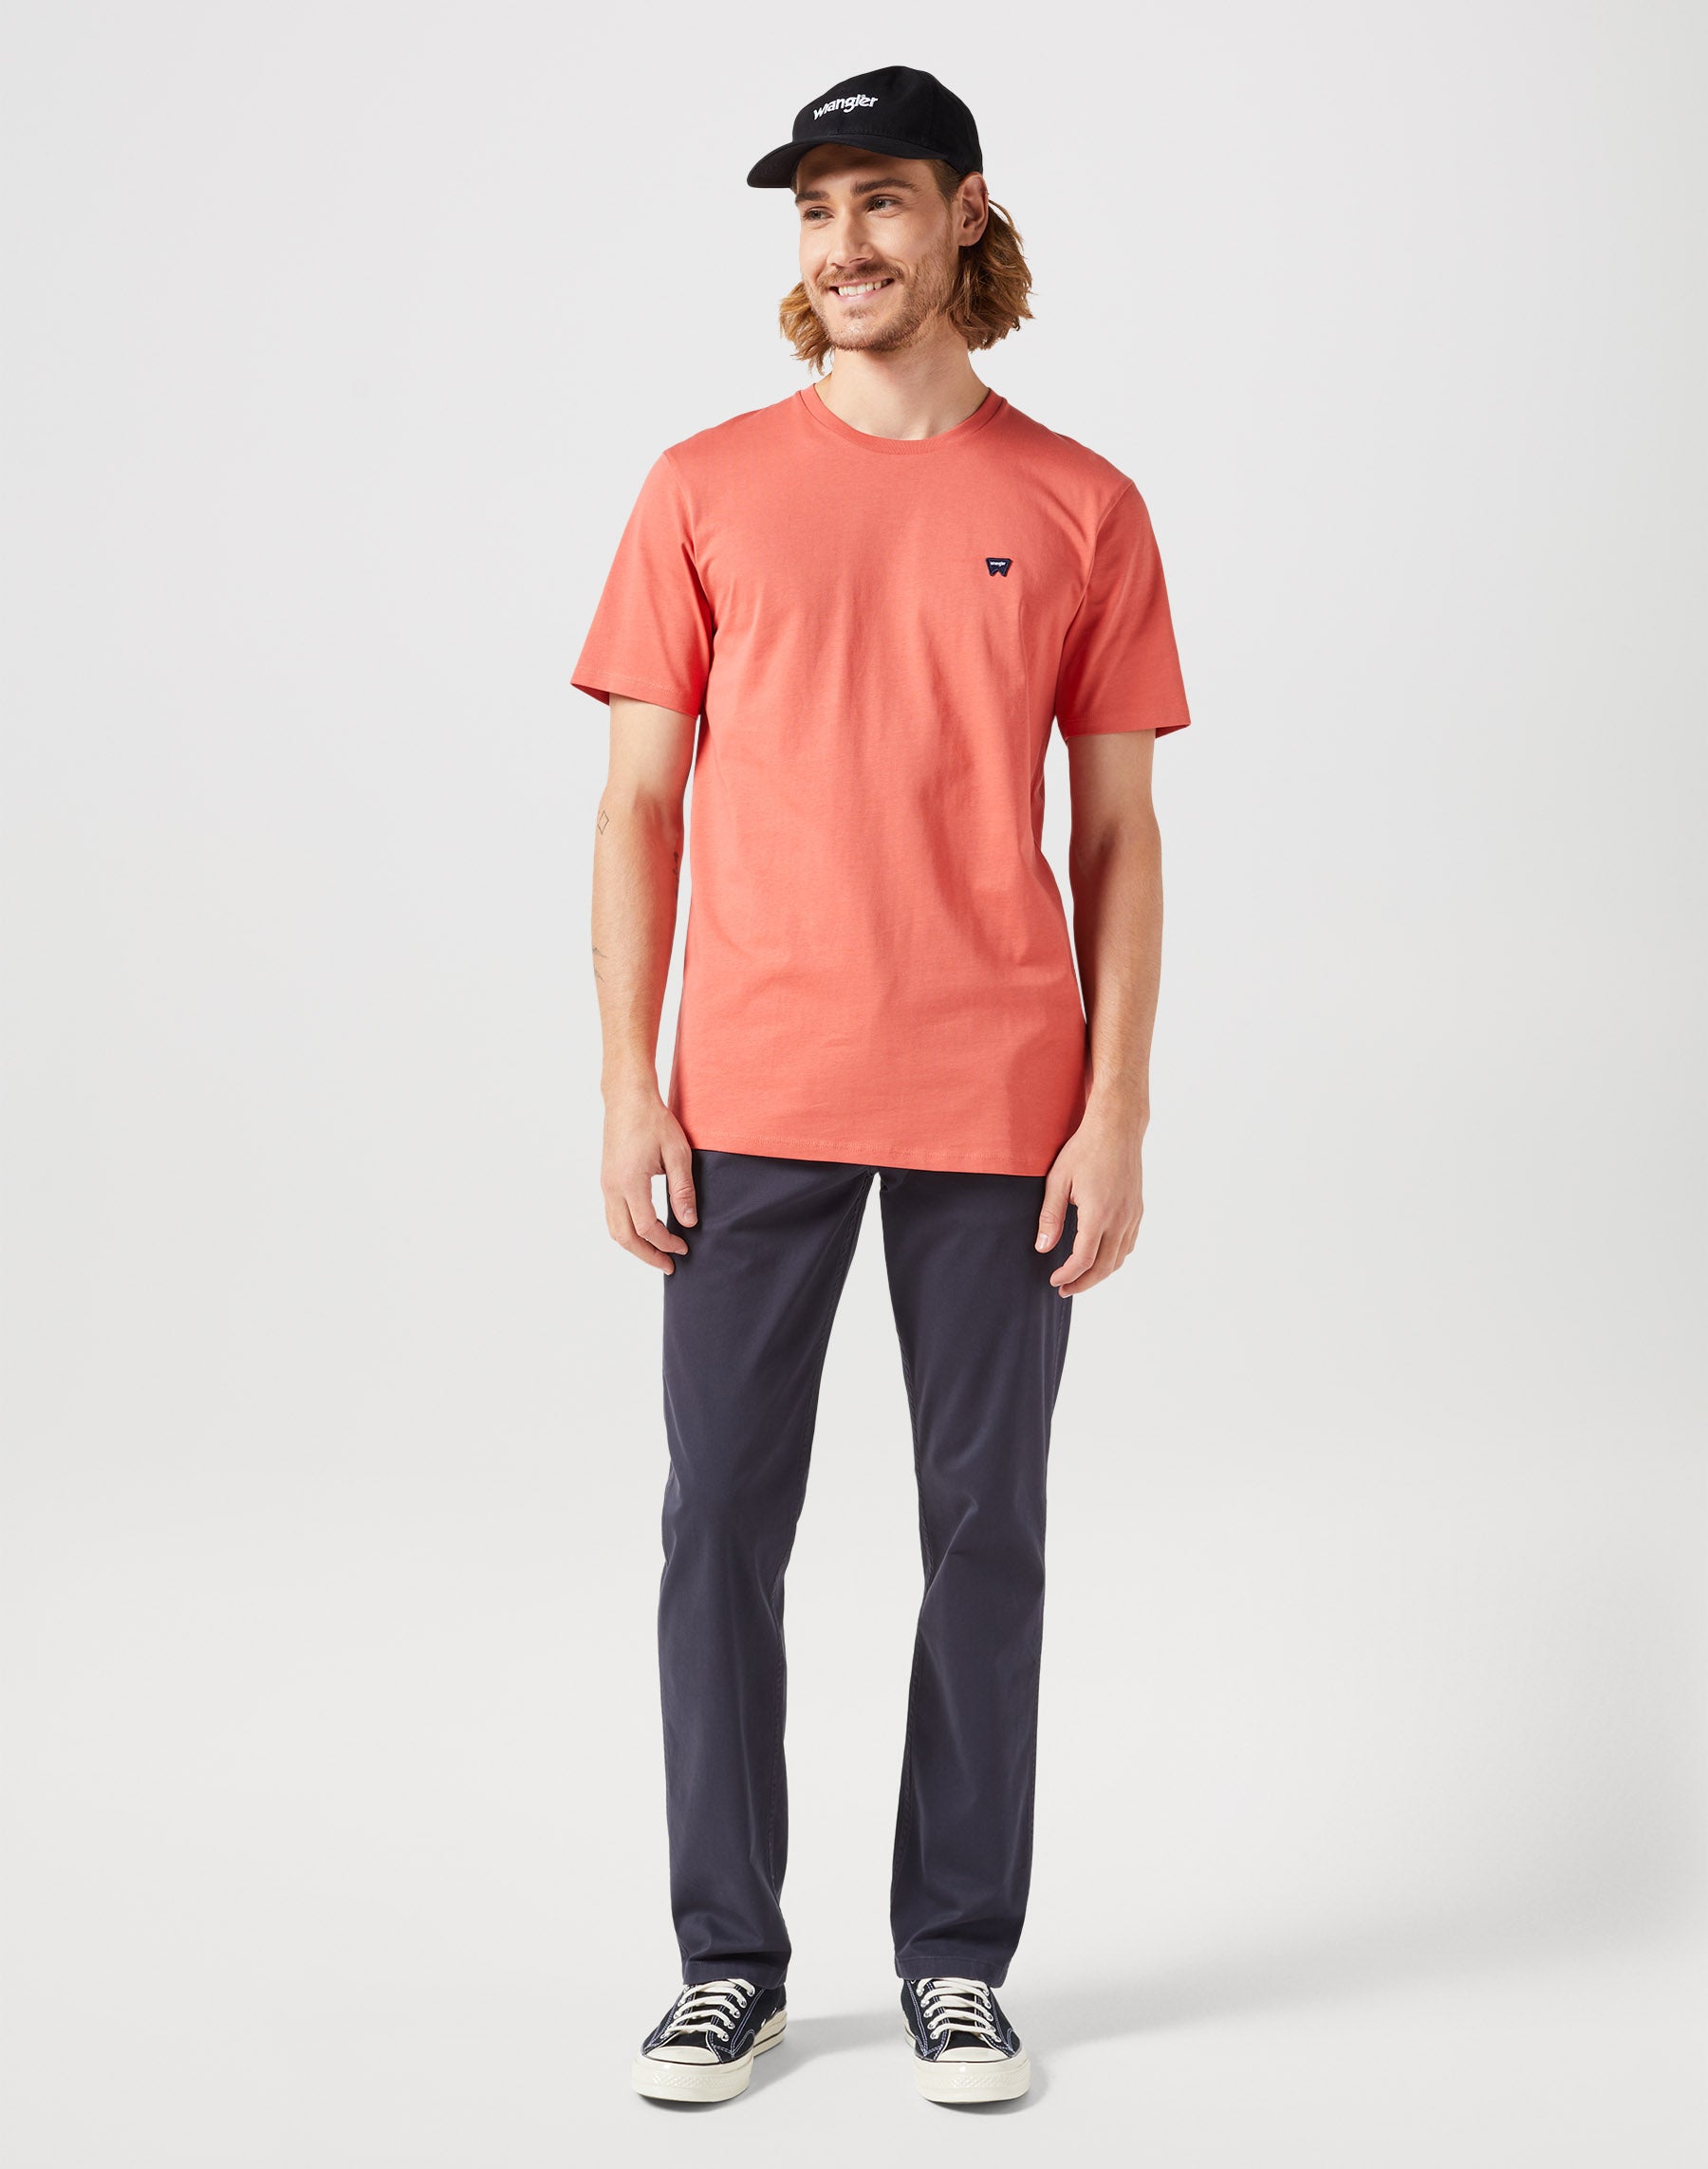 Sign Off Tee in Burnt Sienna T-Shirts Wrangler   